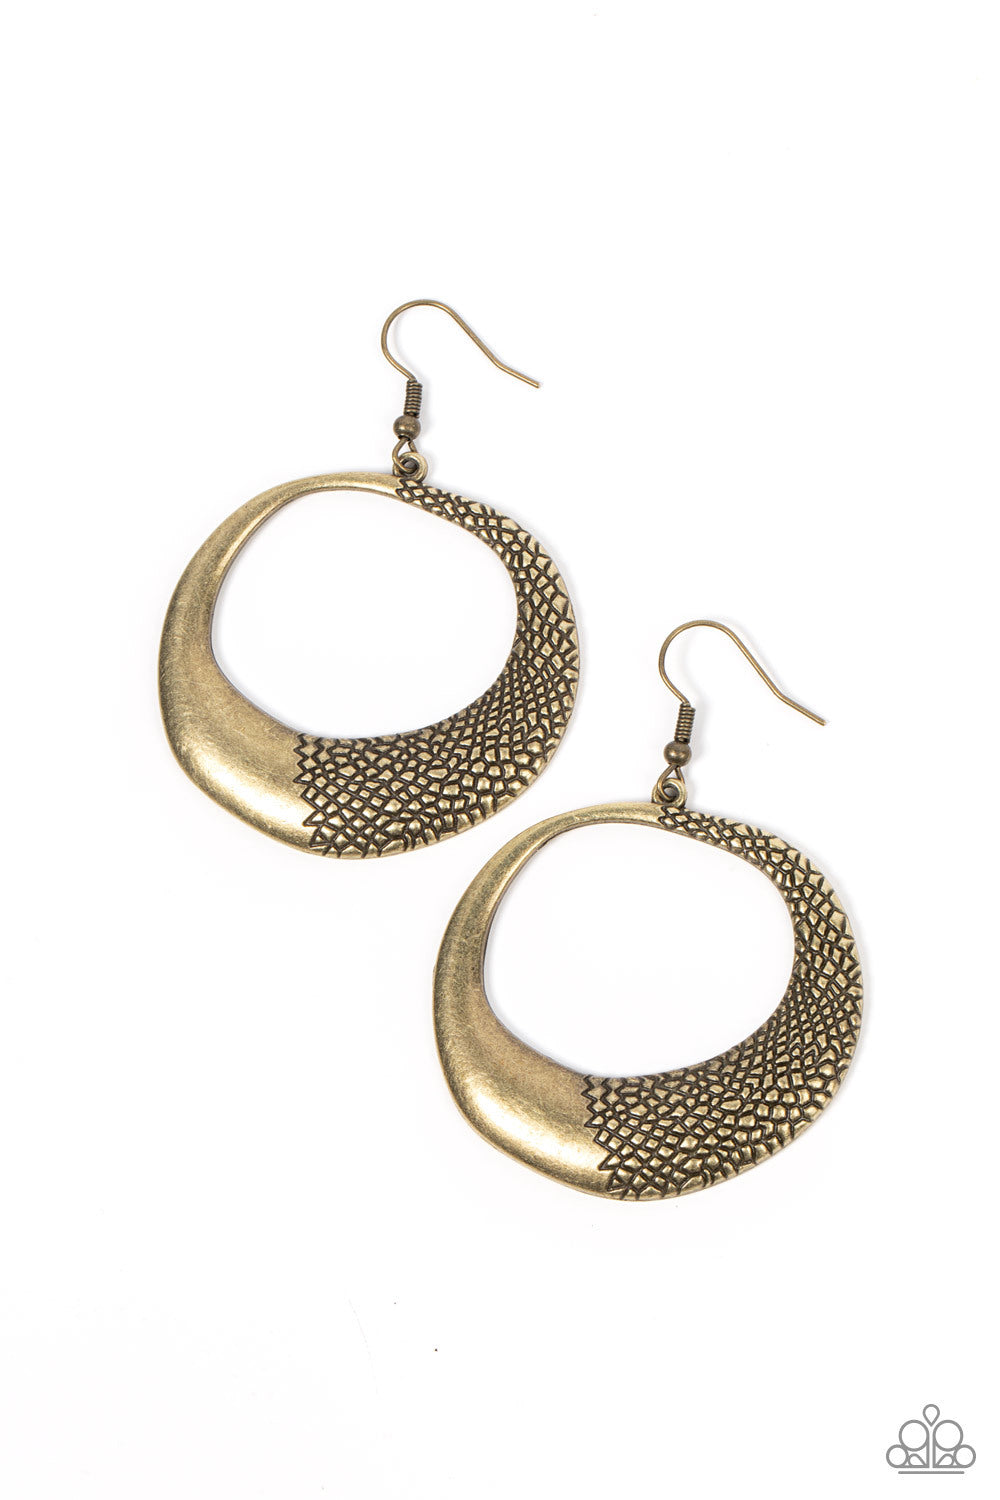 Downtown- Jungle Brass Earrings - Paparazzi Accessories - One side of an asymmetrical brass hoop is embossed in rugged pebble like texture, culminating in a wildly abstract frame.